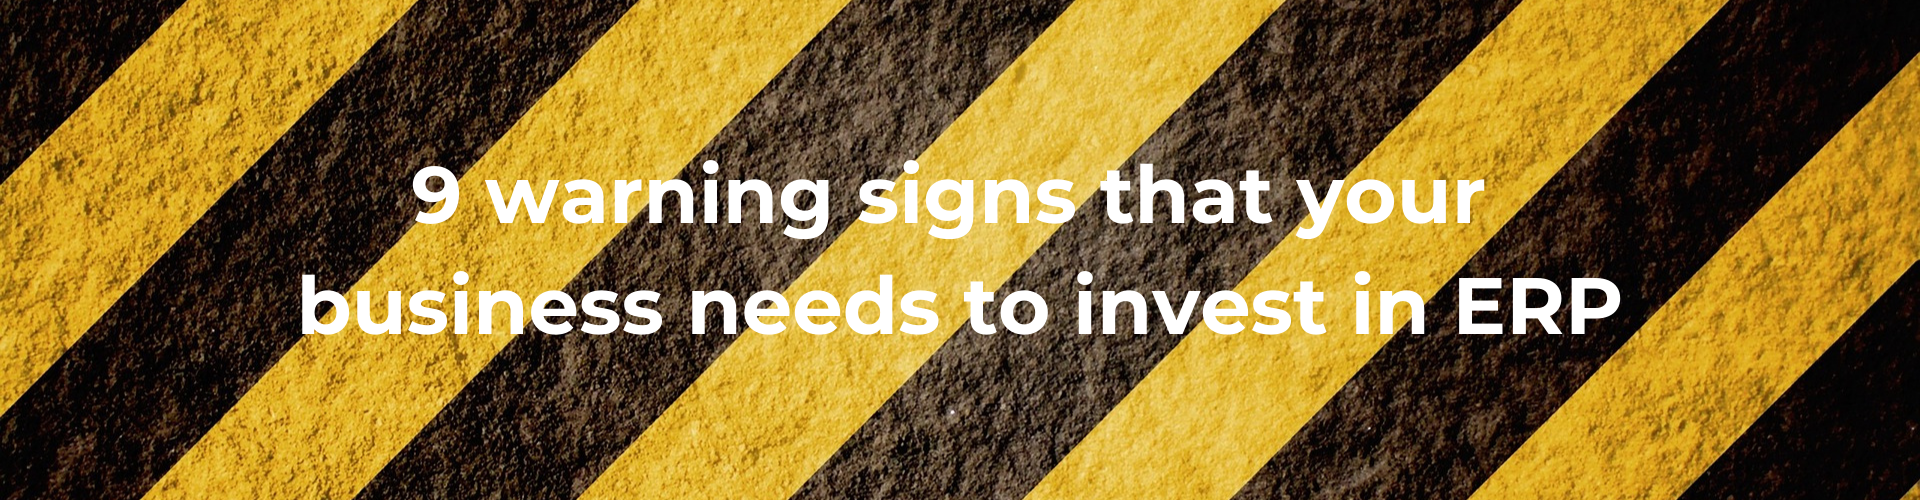 "9 warning signs that your business needs to invest in ERP"